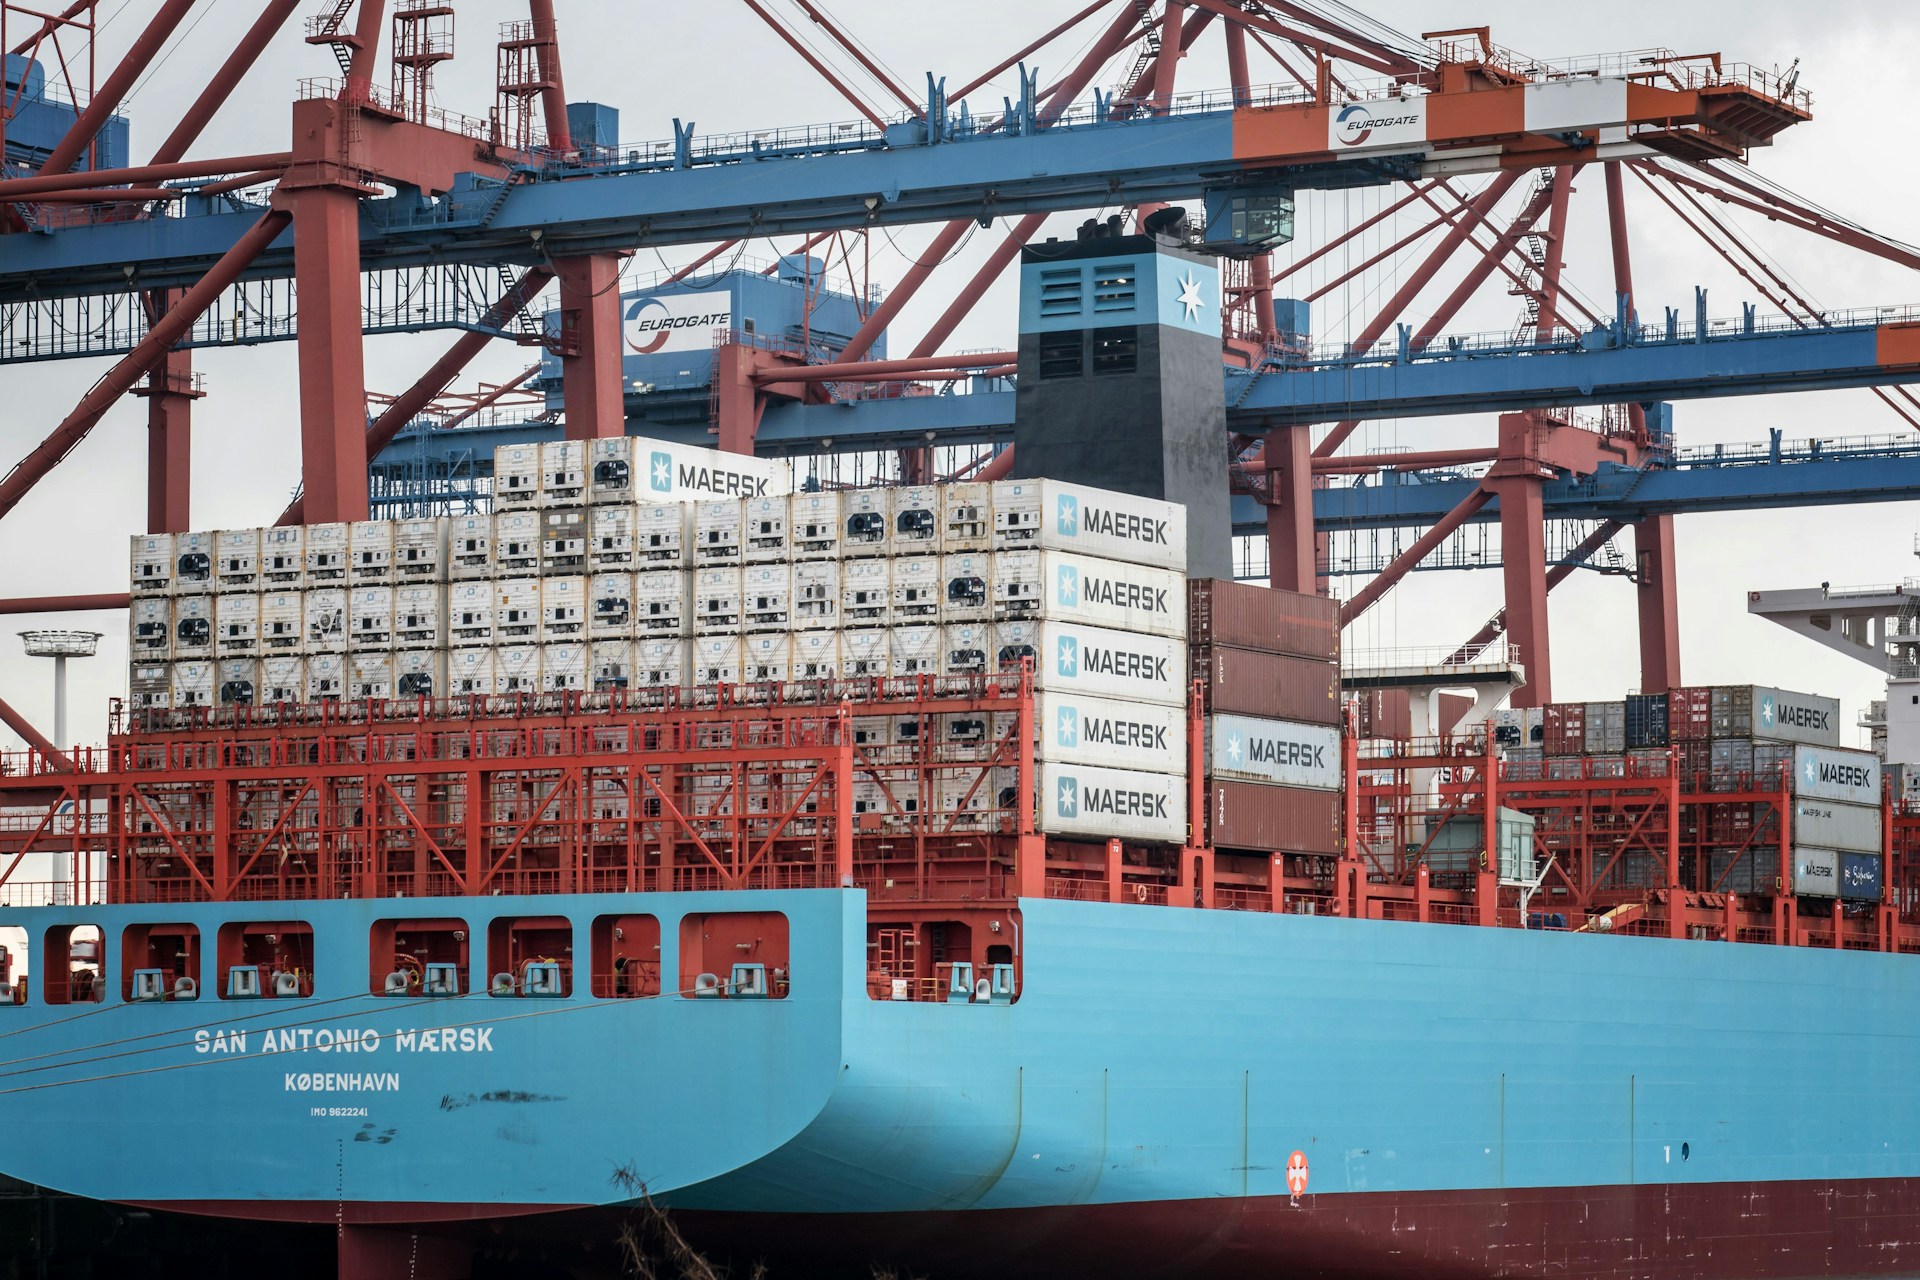 A Maersk container ship in port